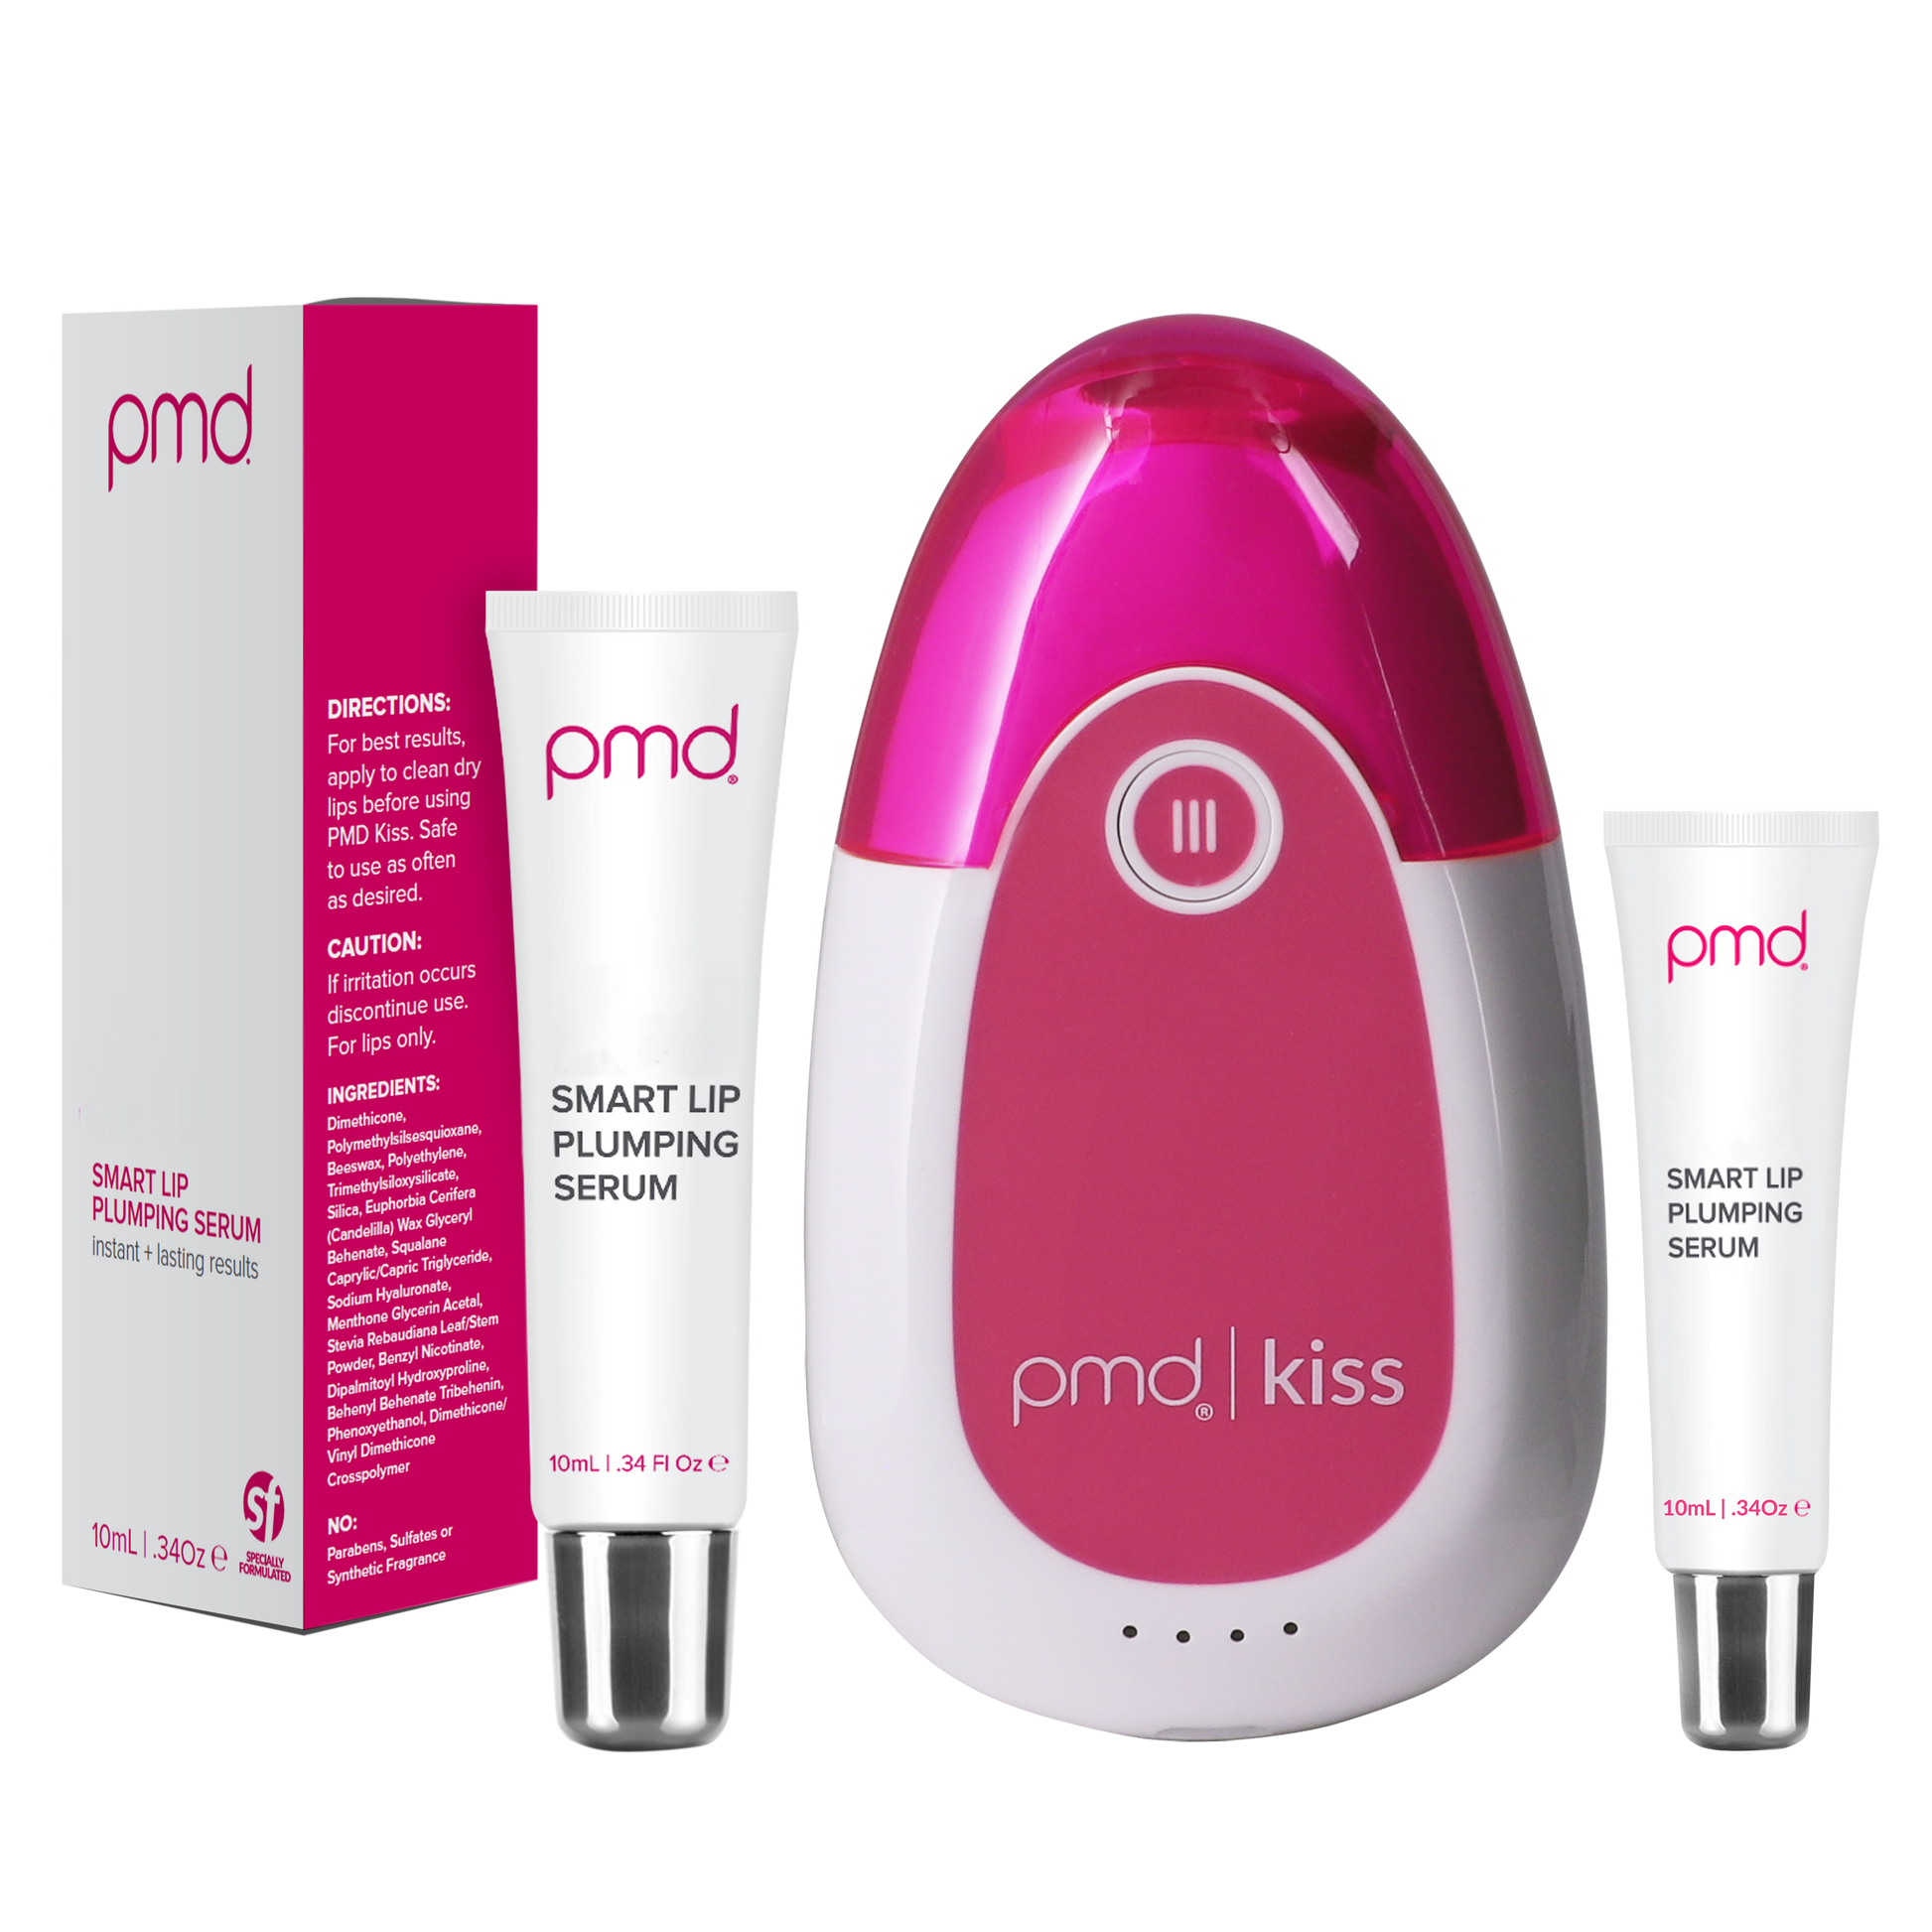 BNDL_plumped_pink?PMD Kiss System in Pink & Smart Lip Plumping Serum